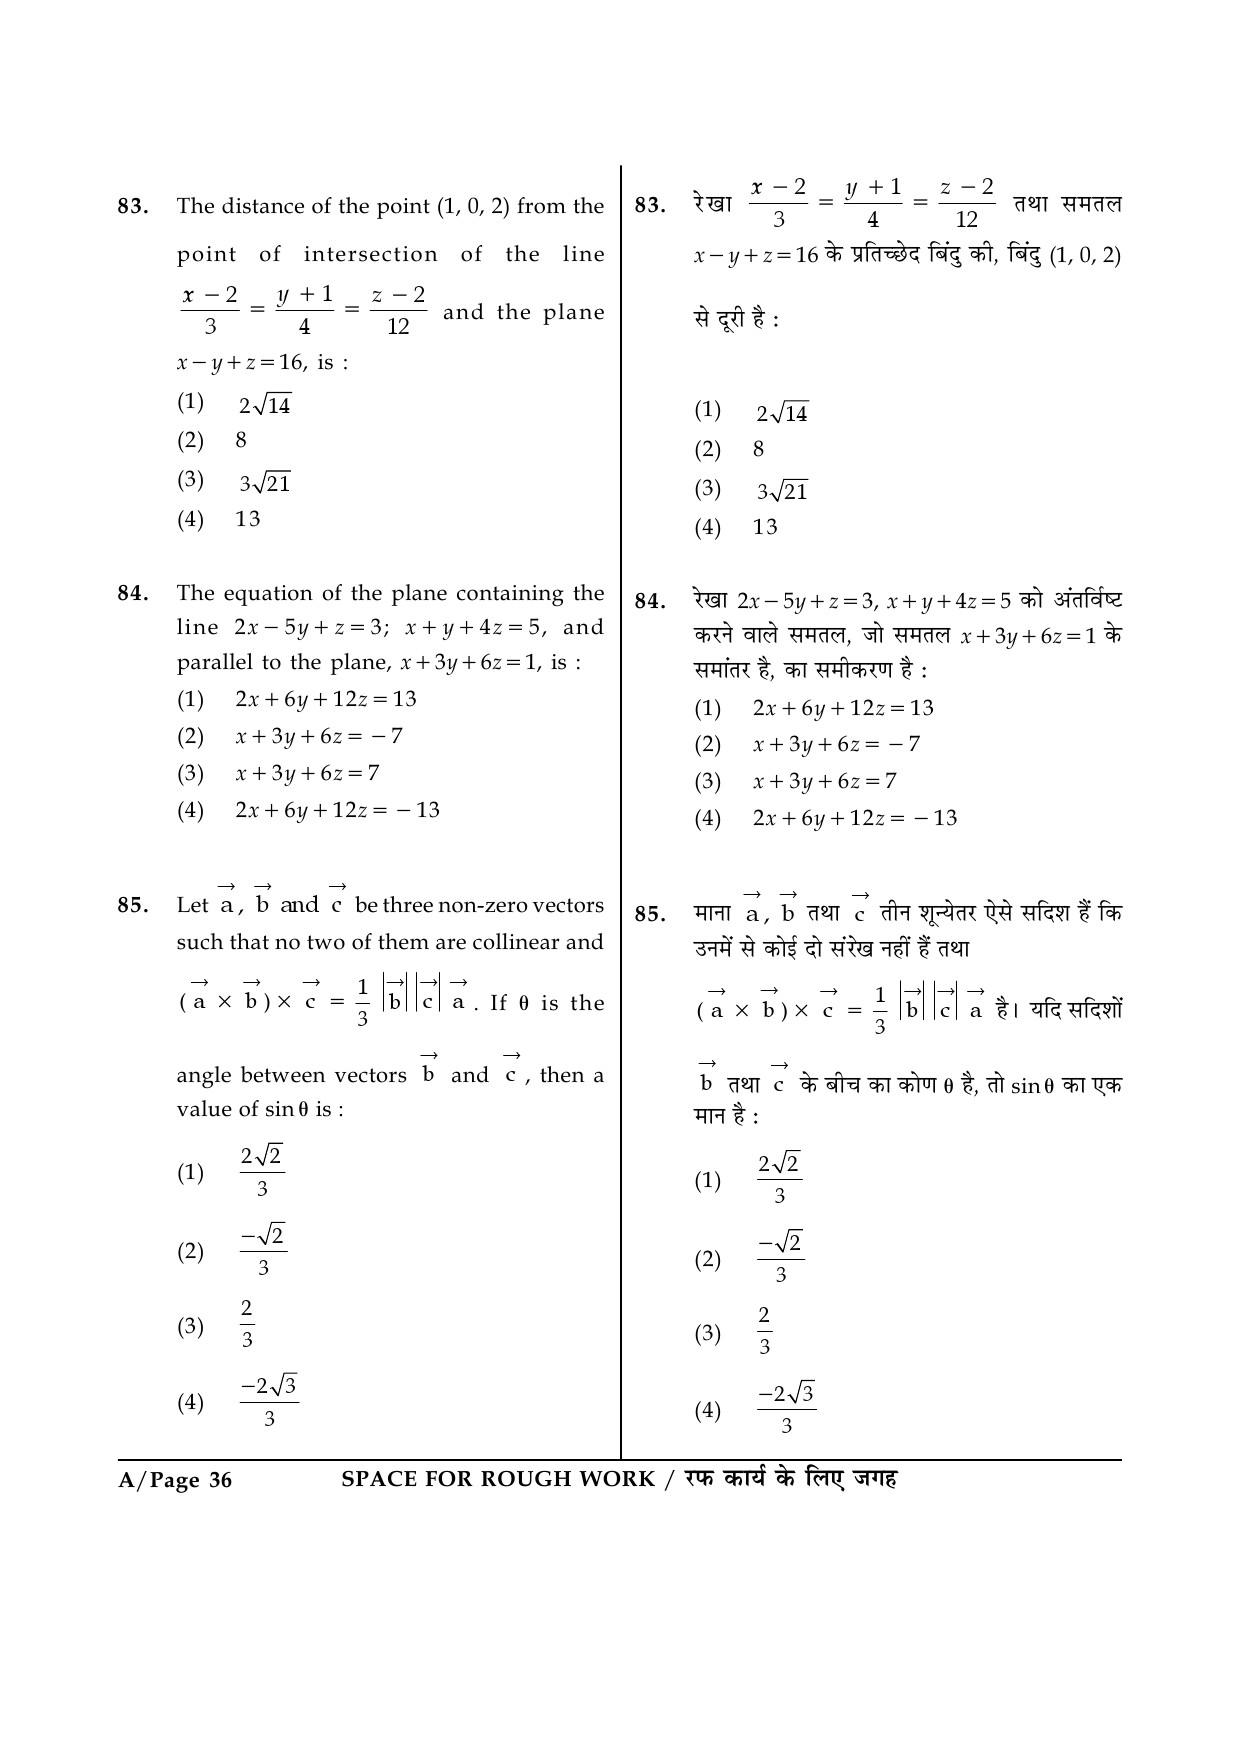 JEE Main Exam Question Paper 2015 Booklet A 36